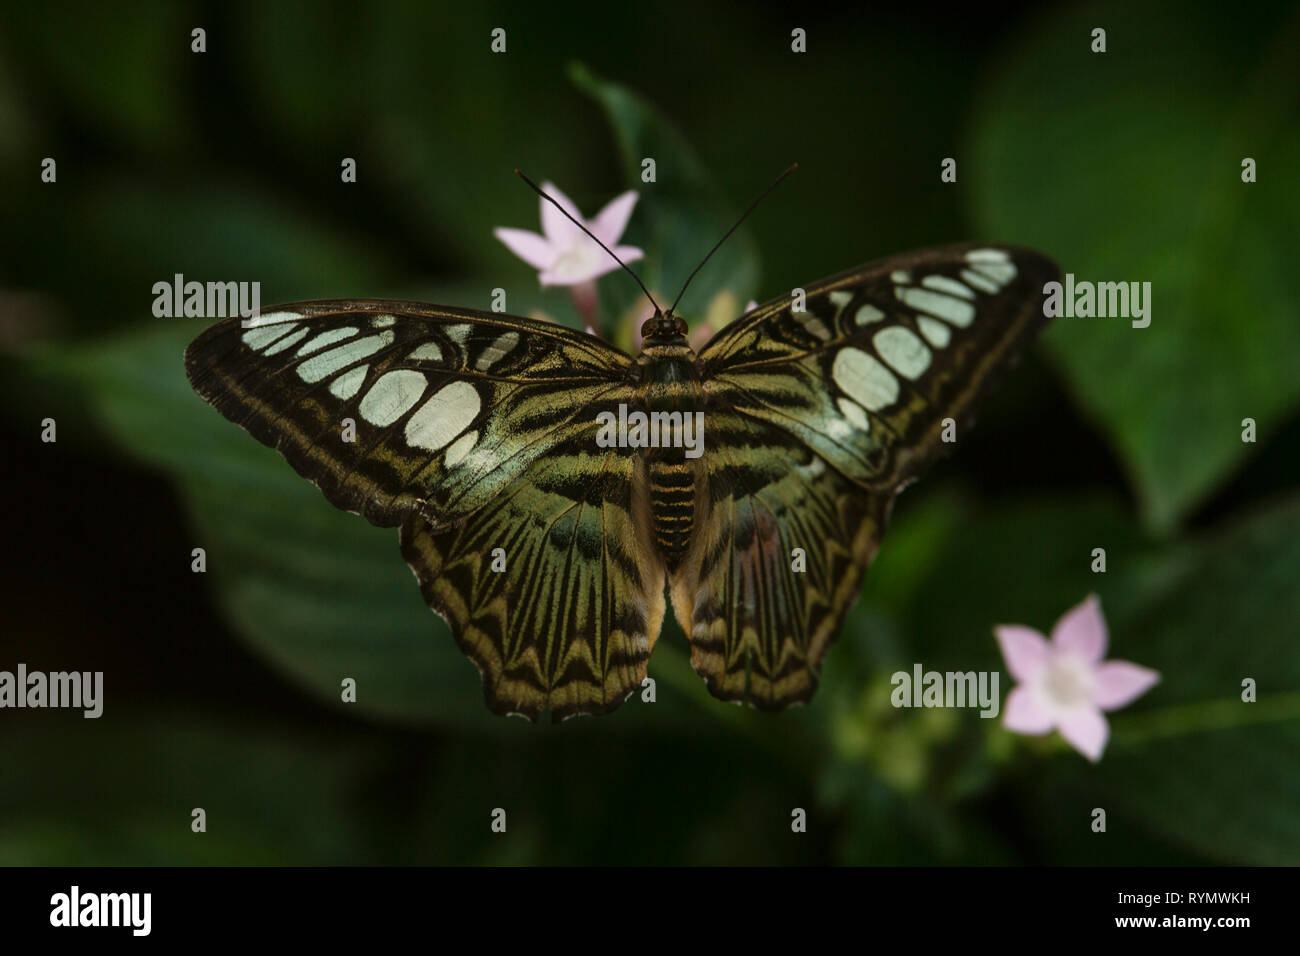 Parthenos sylvia, the clipper, a species of nymphalid butterfly found in south and southeast Asia, resting on a pink pentas (Pentas lanceolata) bush. Stock Photo